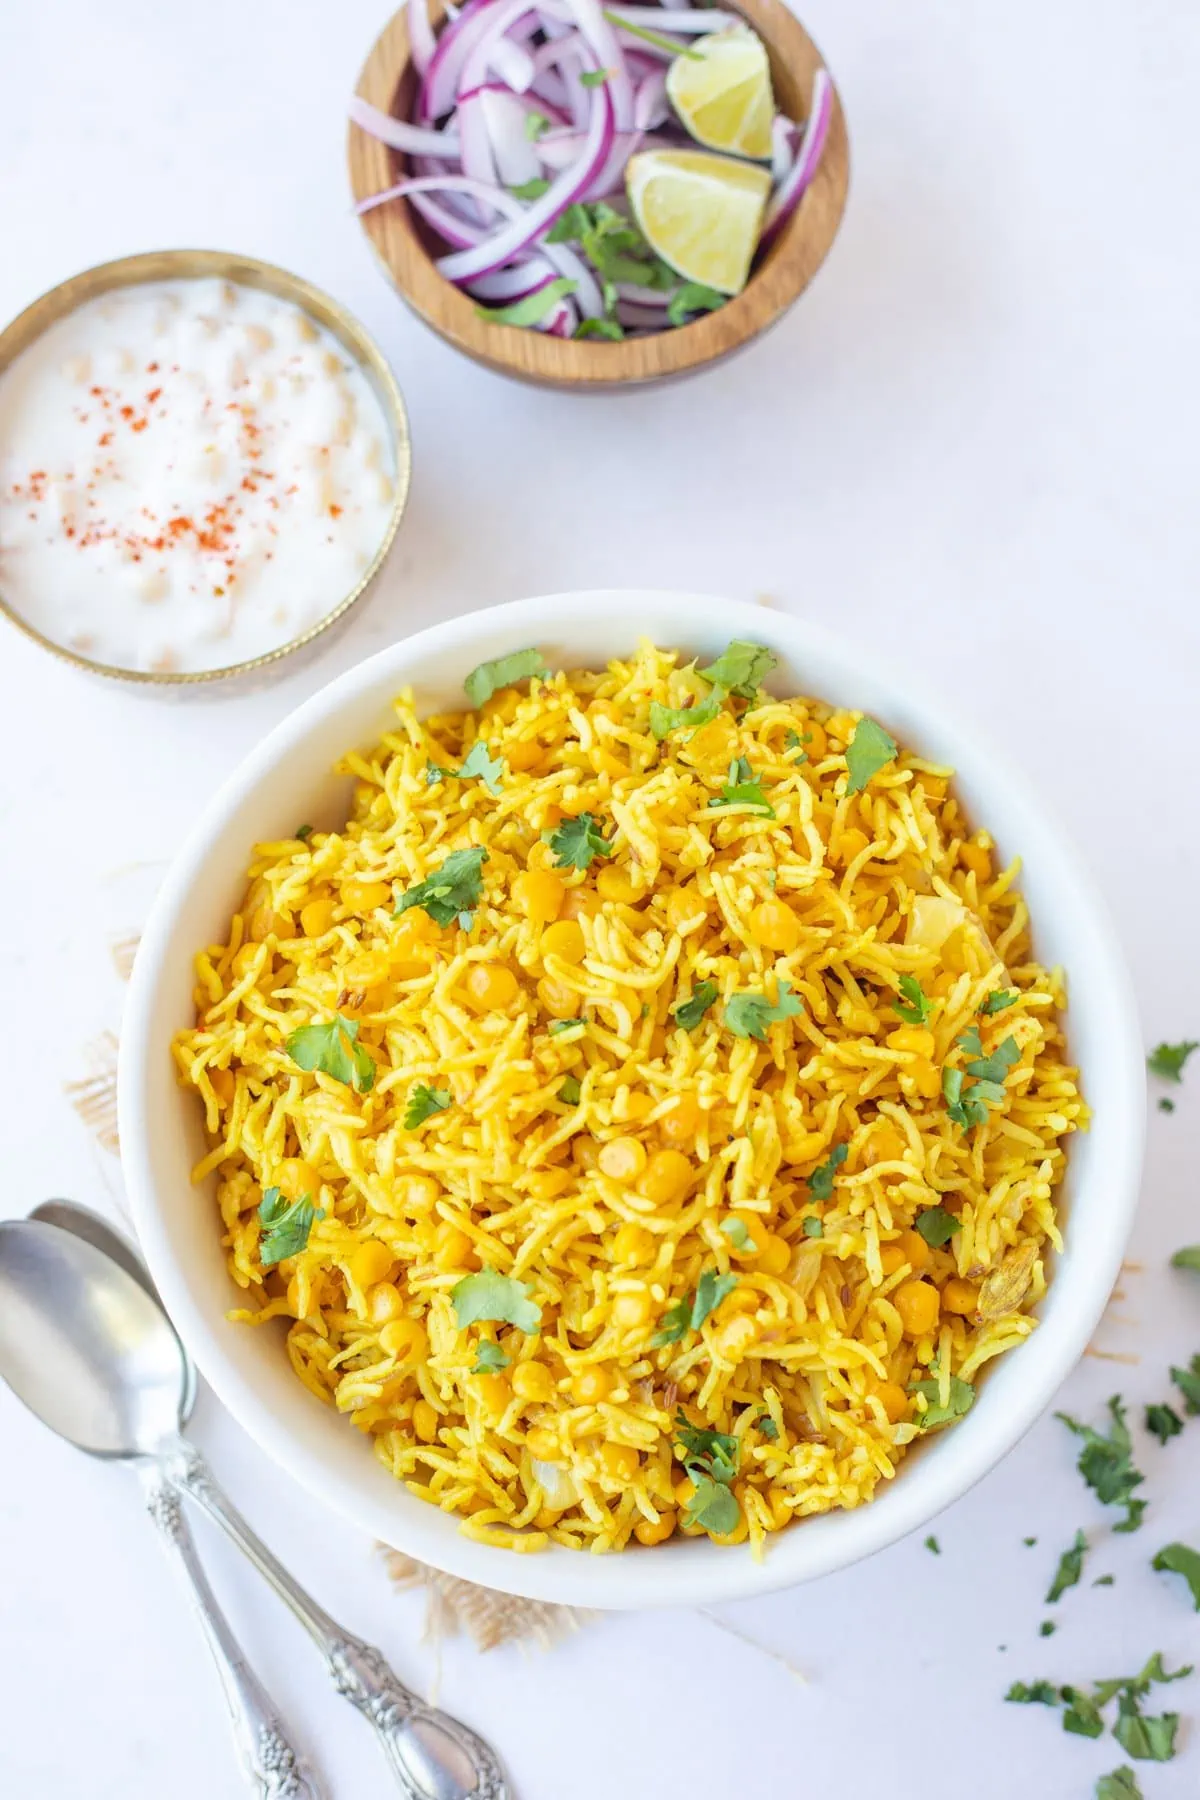 chana dal pulao in a white bowl with raita and onion salad on the side